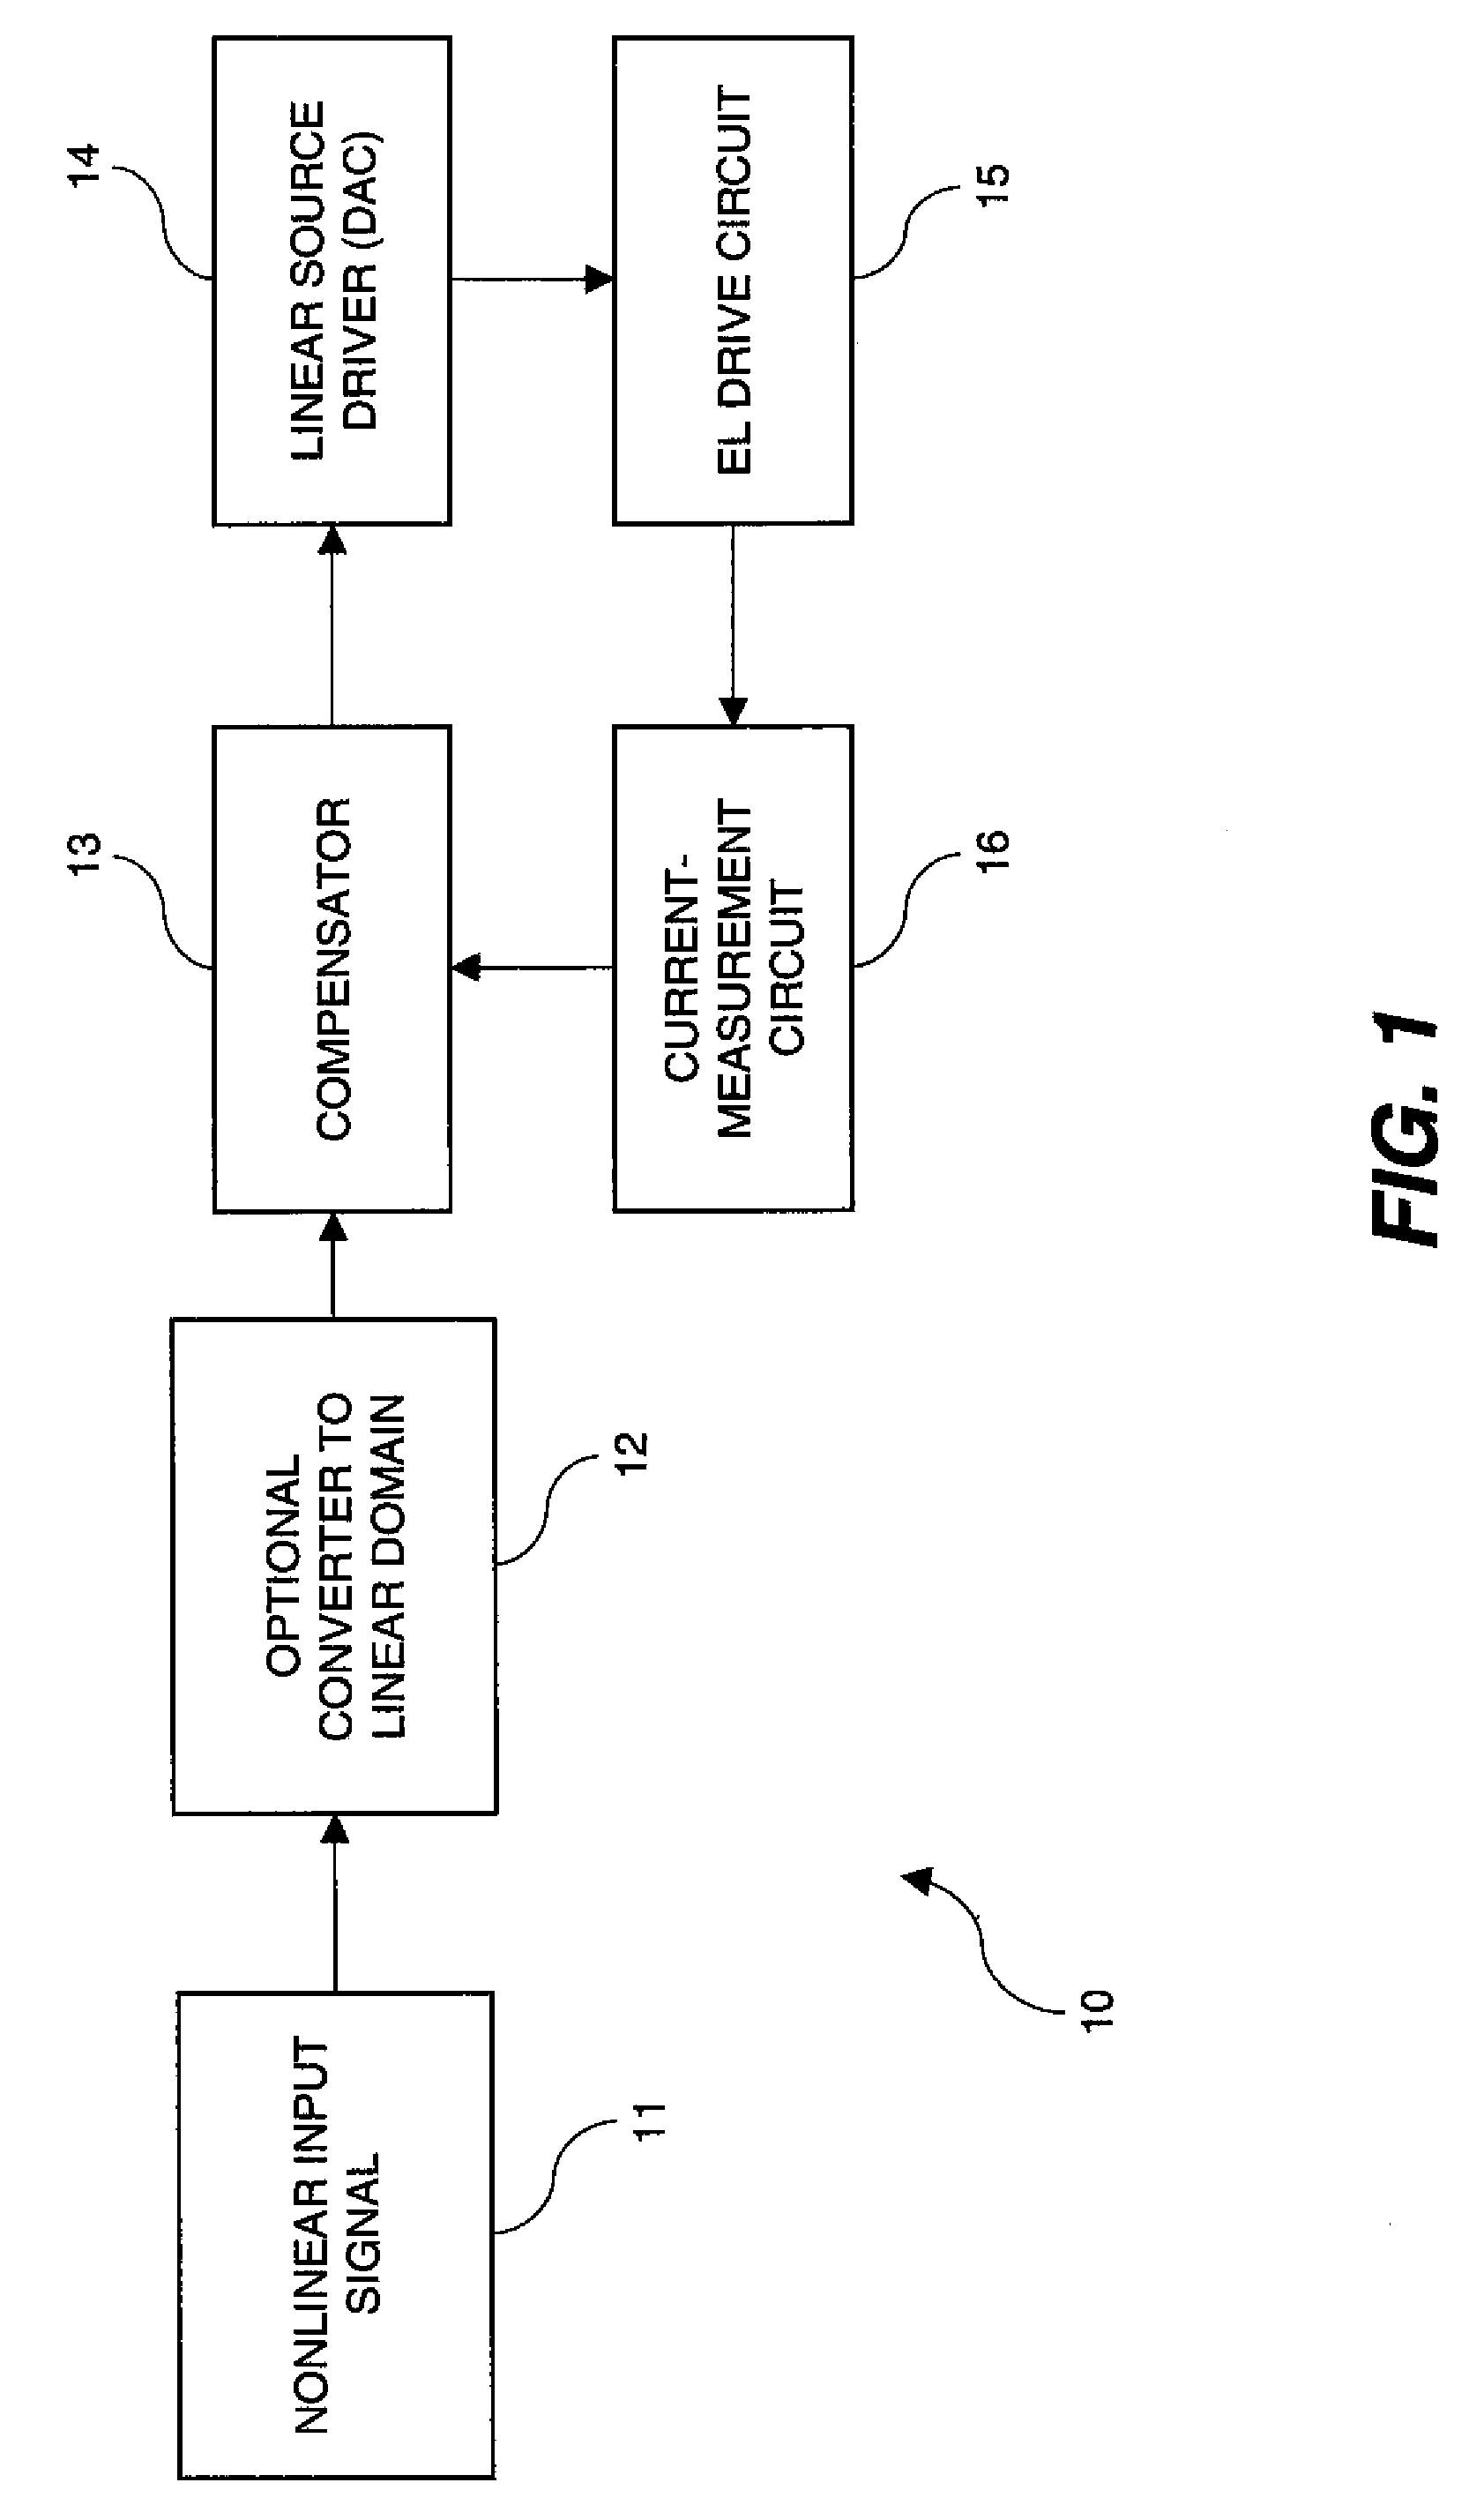 Electroluminescent display compensated analog transistor drive signal